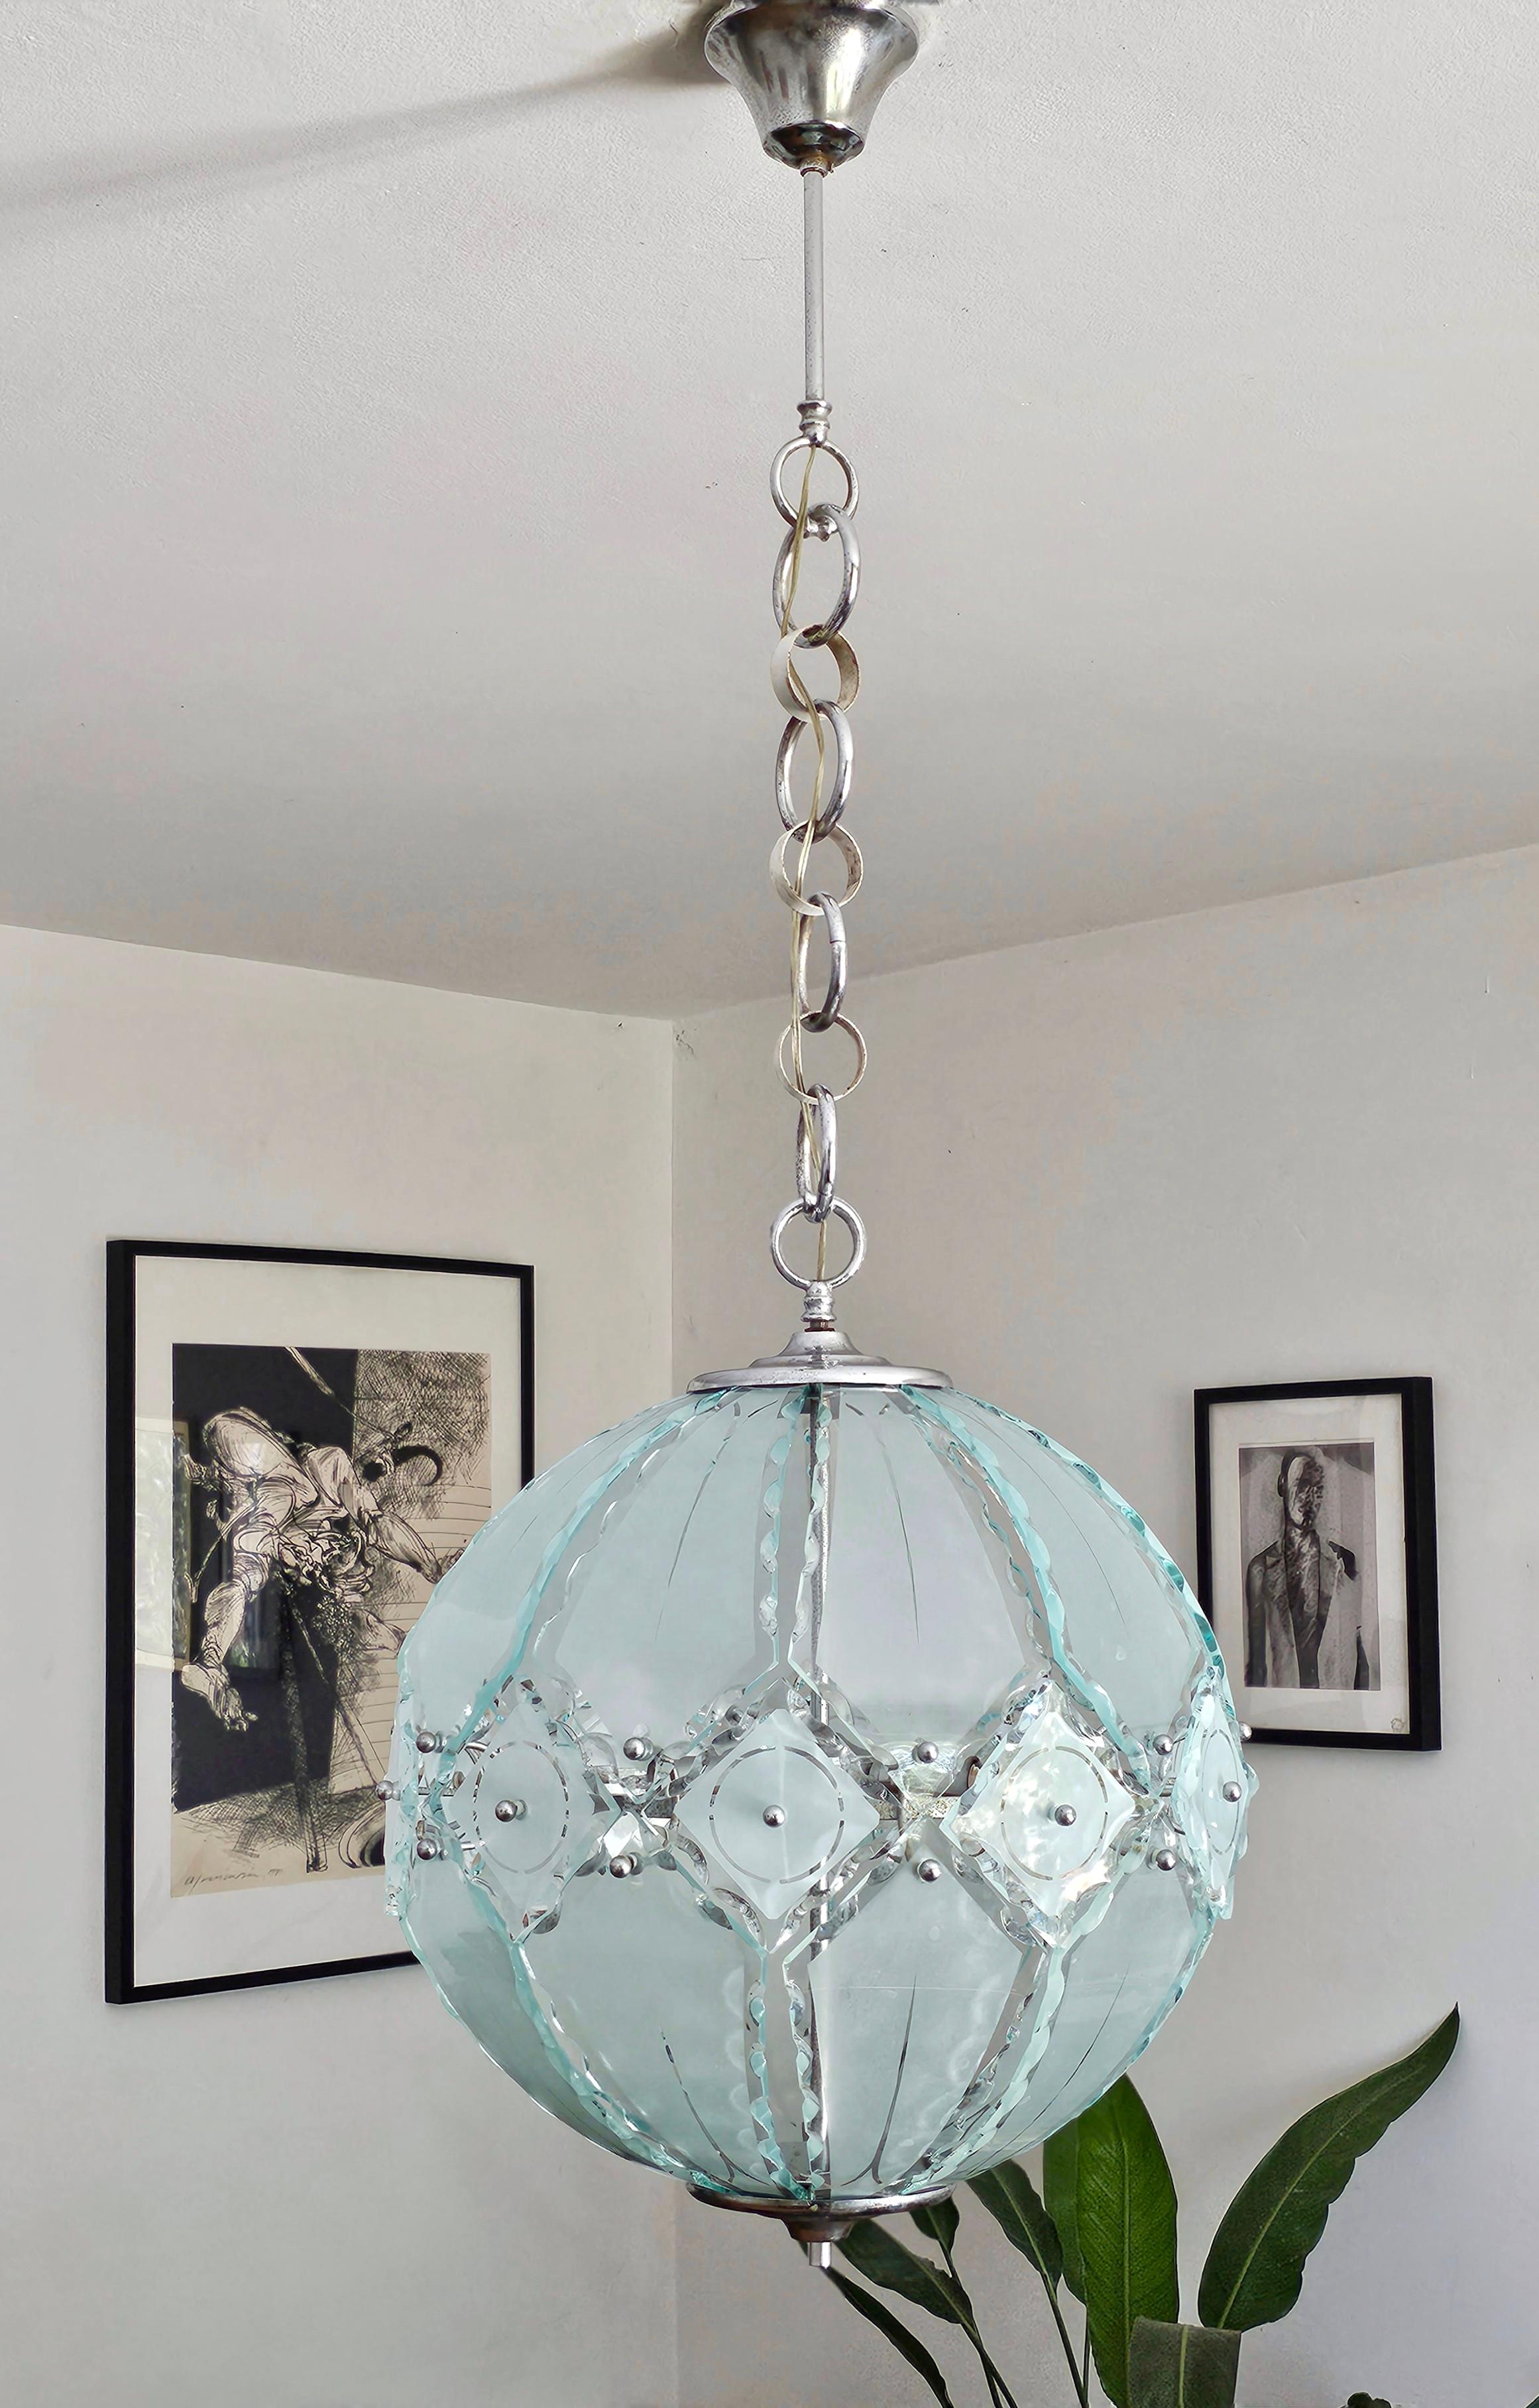 In this listing you will find one of the most spectacular pendant lights of the 70s, designed in collaboration between Zero Quattro and Fontana Arte. It features spheric shape consisting of pieces of glass with rough edges. It has 5 light bulb